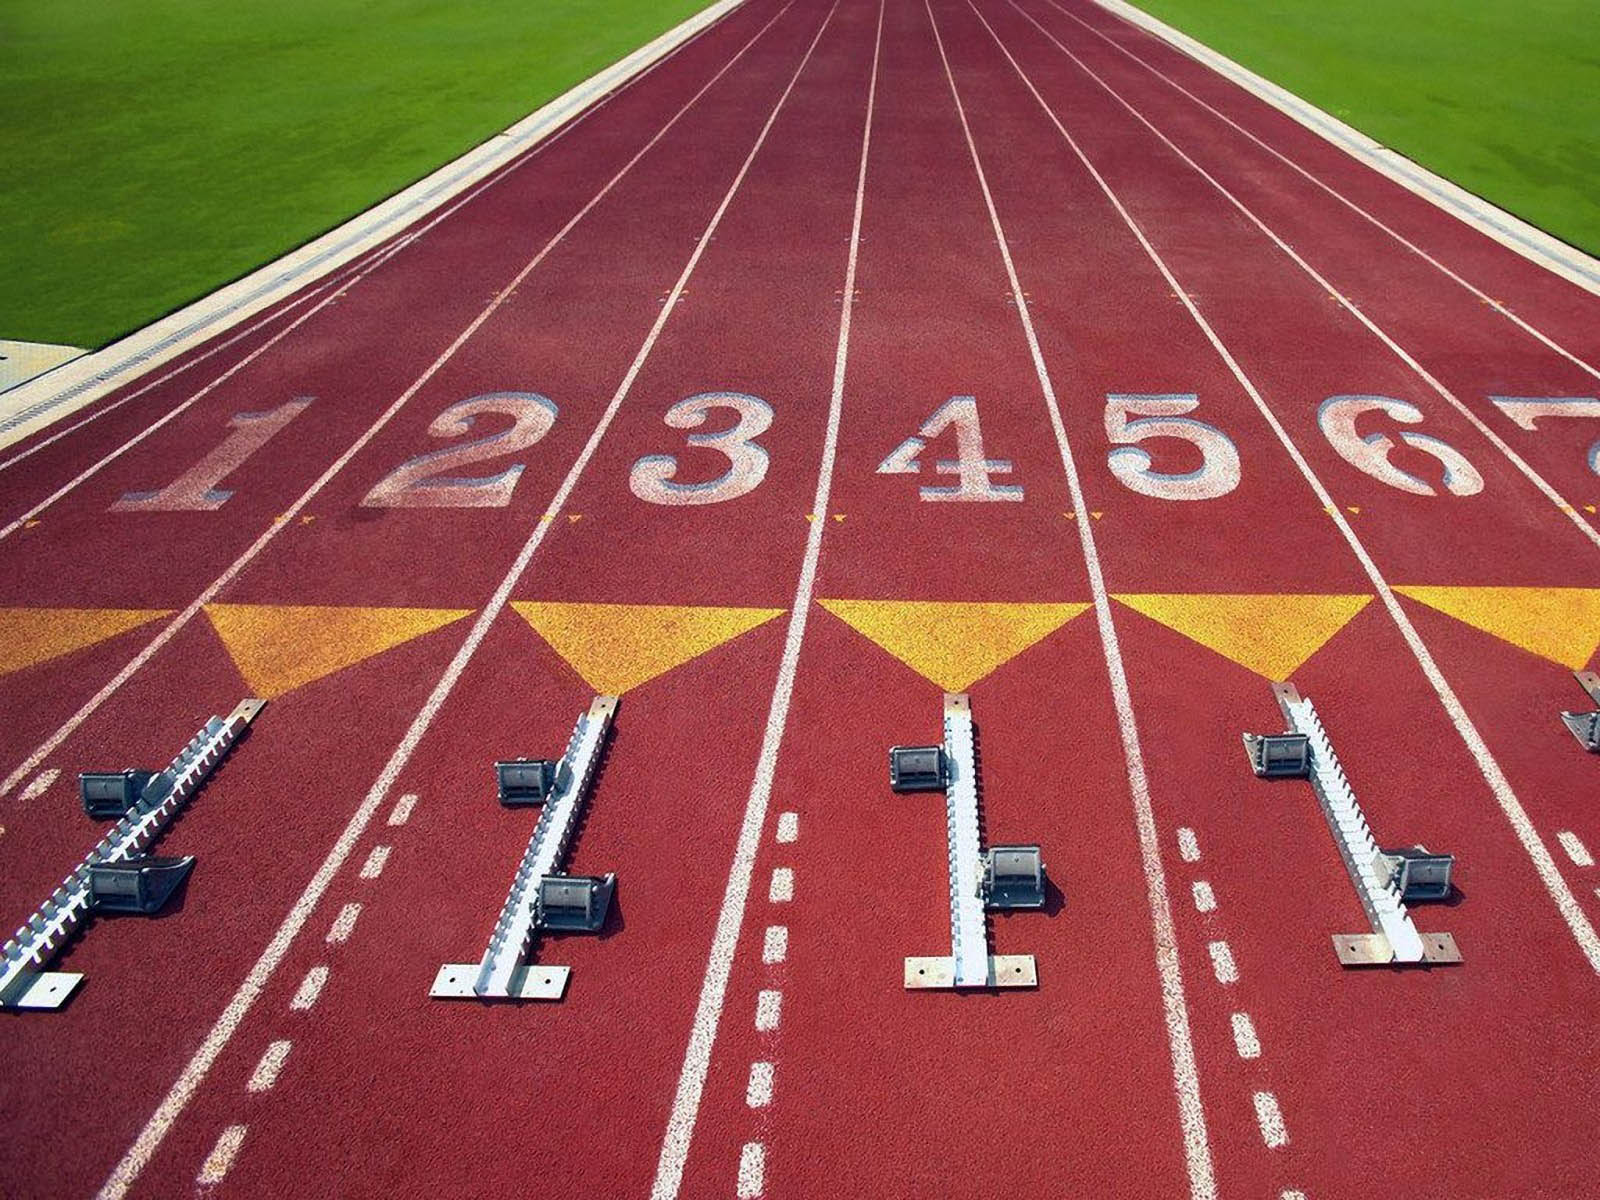 Track and field clipart wallpapers free